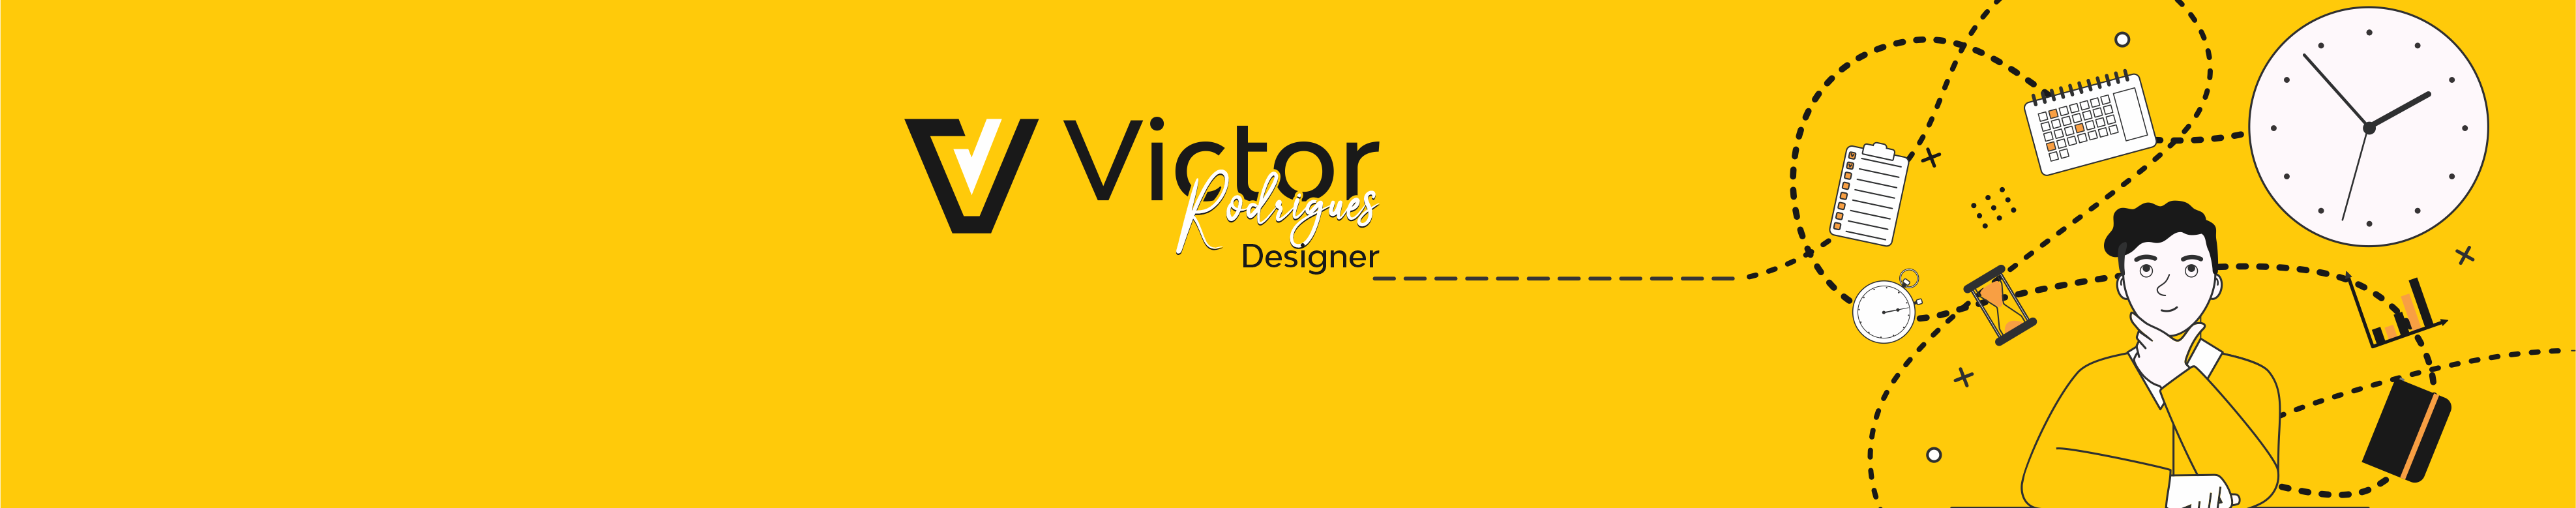 Victor Rodrigues's profile banner